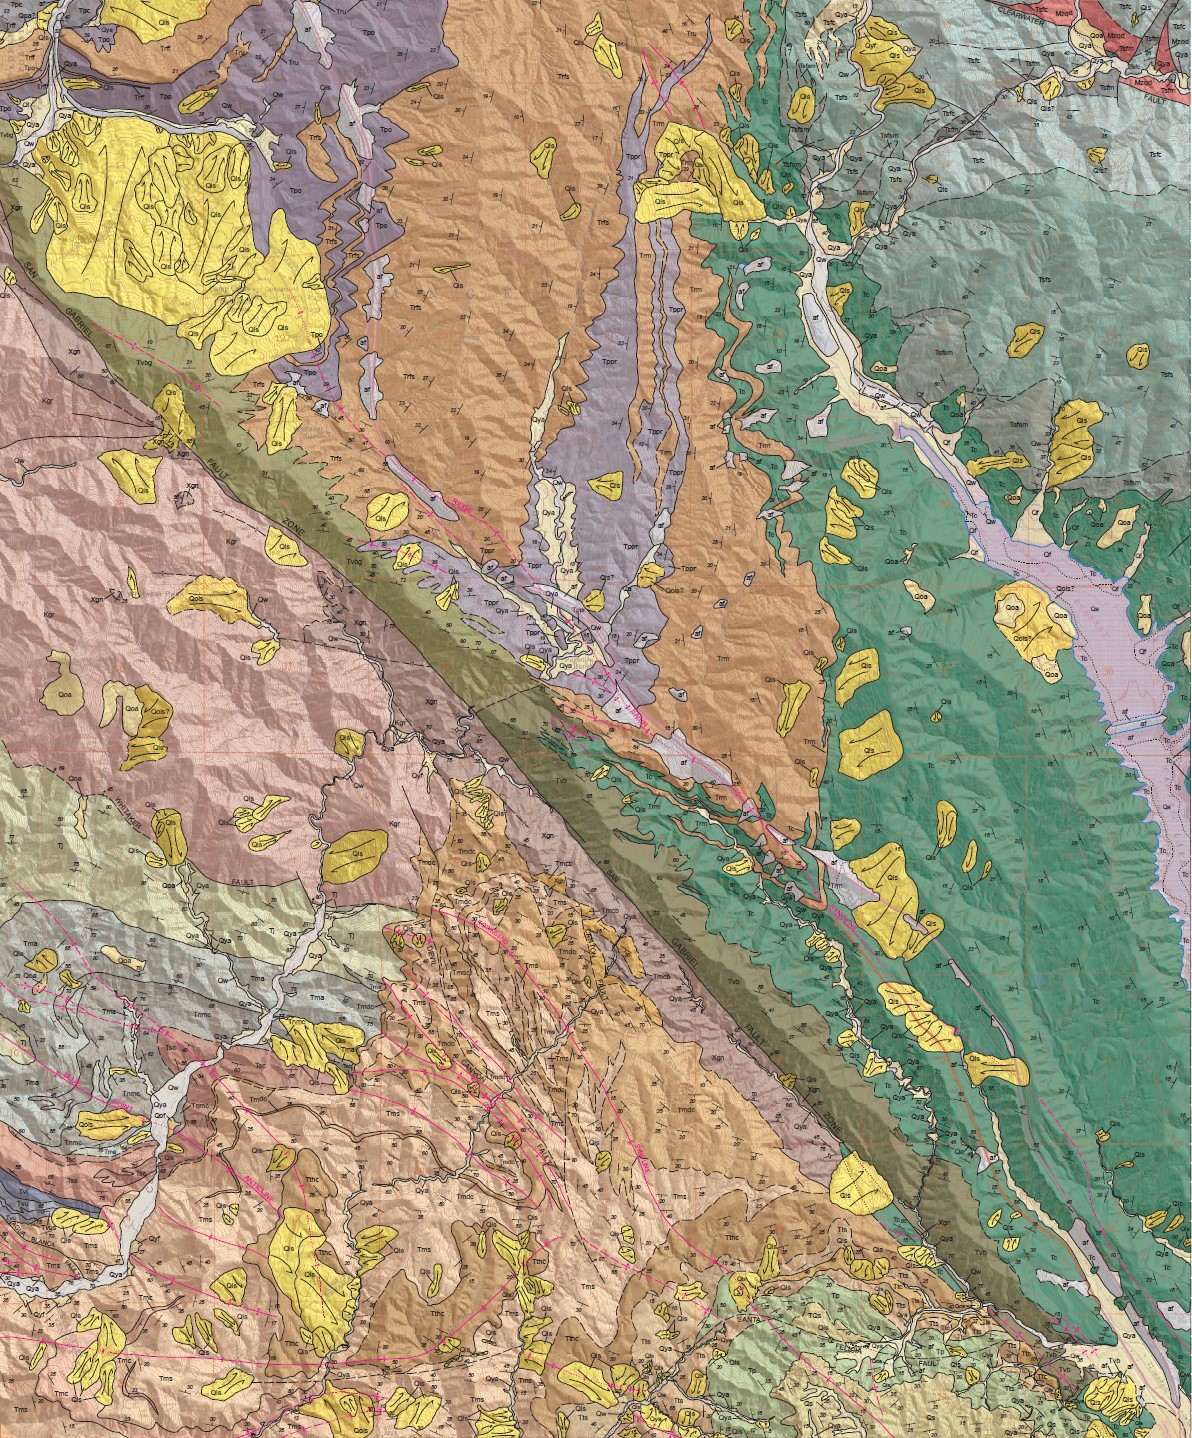 Decorative image showing a representative portion of a geologic map.